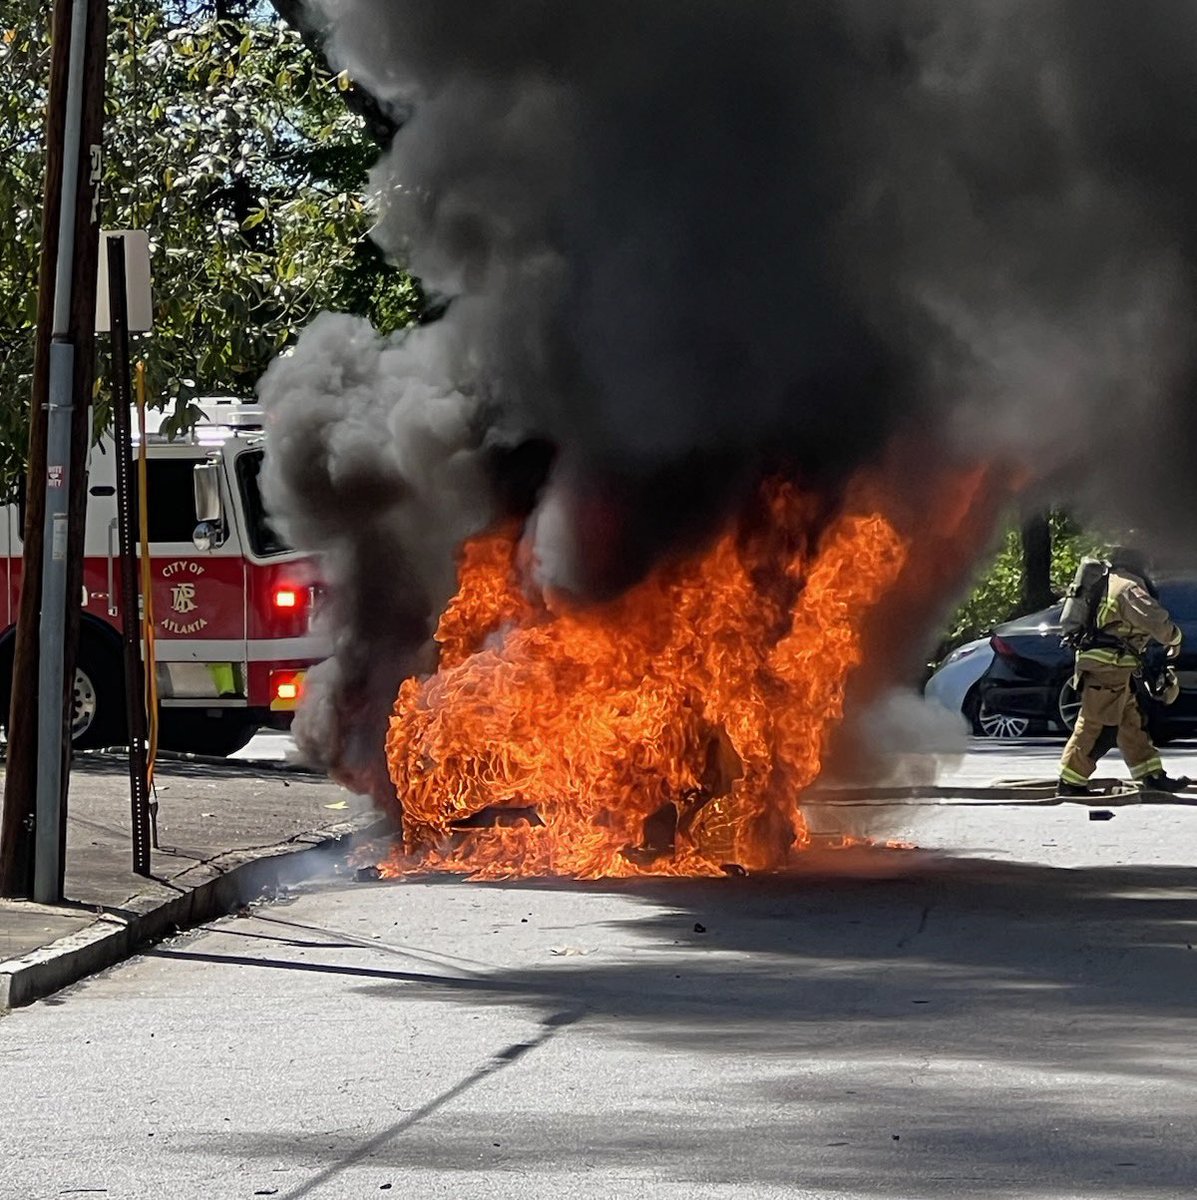 Atlanta Fire officials say a car erupted in flames near the Peachtree Battle shopping center Tuesday afternoon. One person was found dead in the vehicle. Fire investigators are trying to determine how it happened.